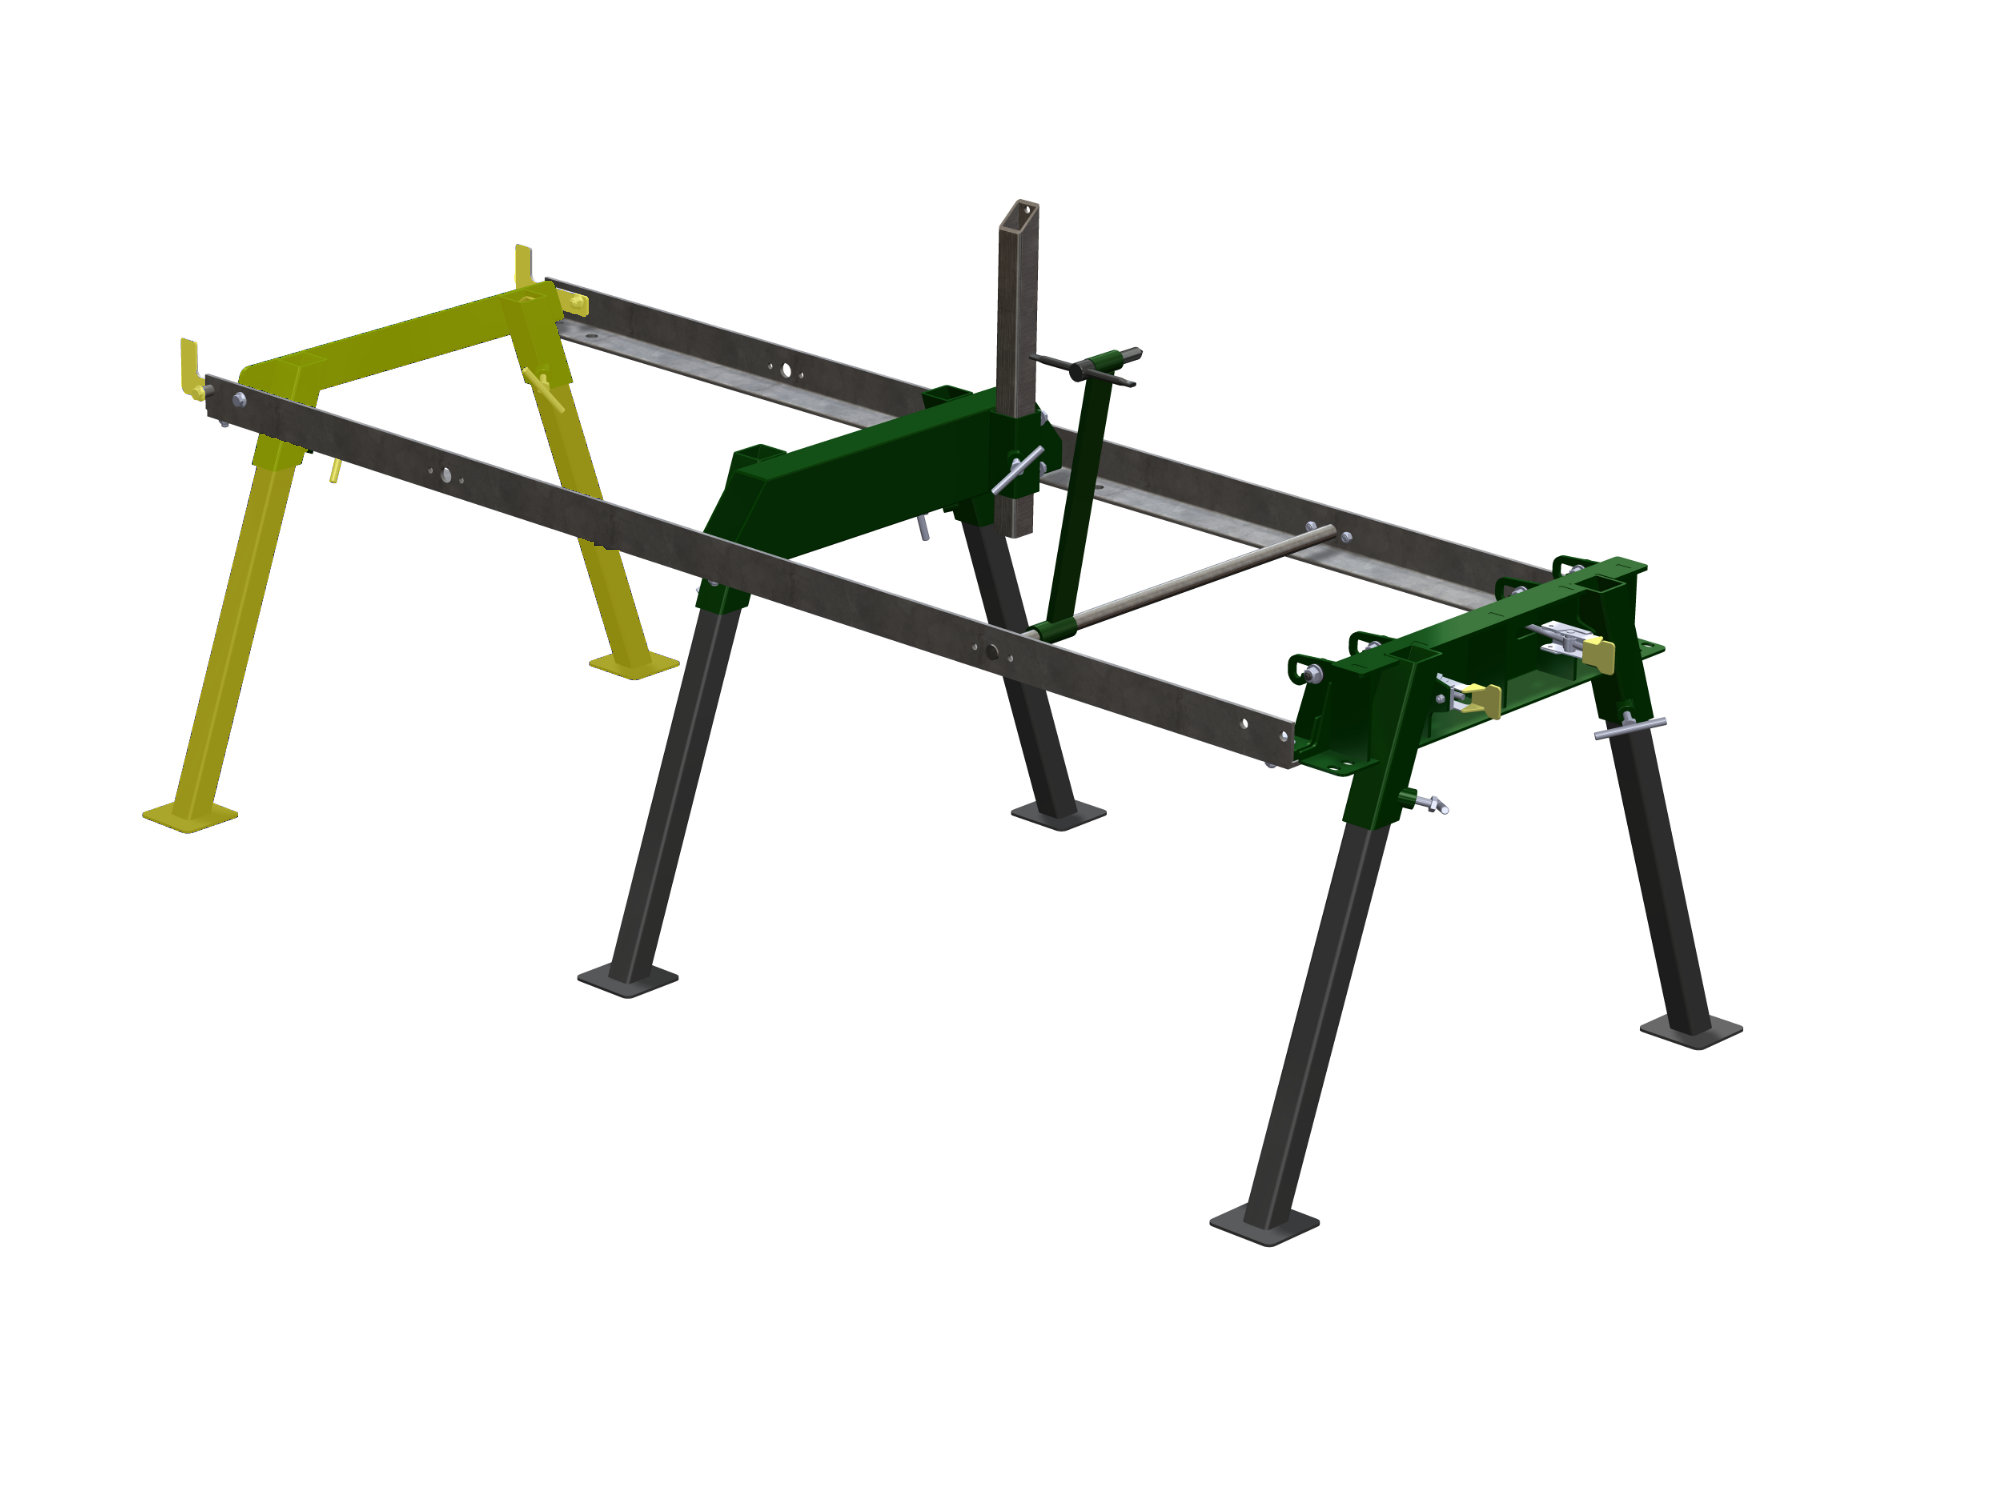 HM122 Portable Sawmill Mobility Package